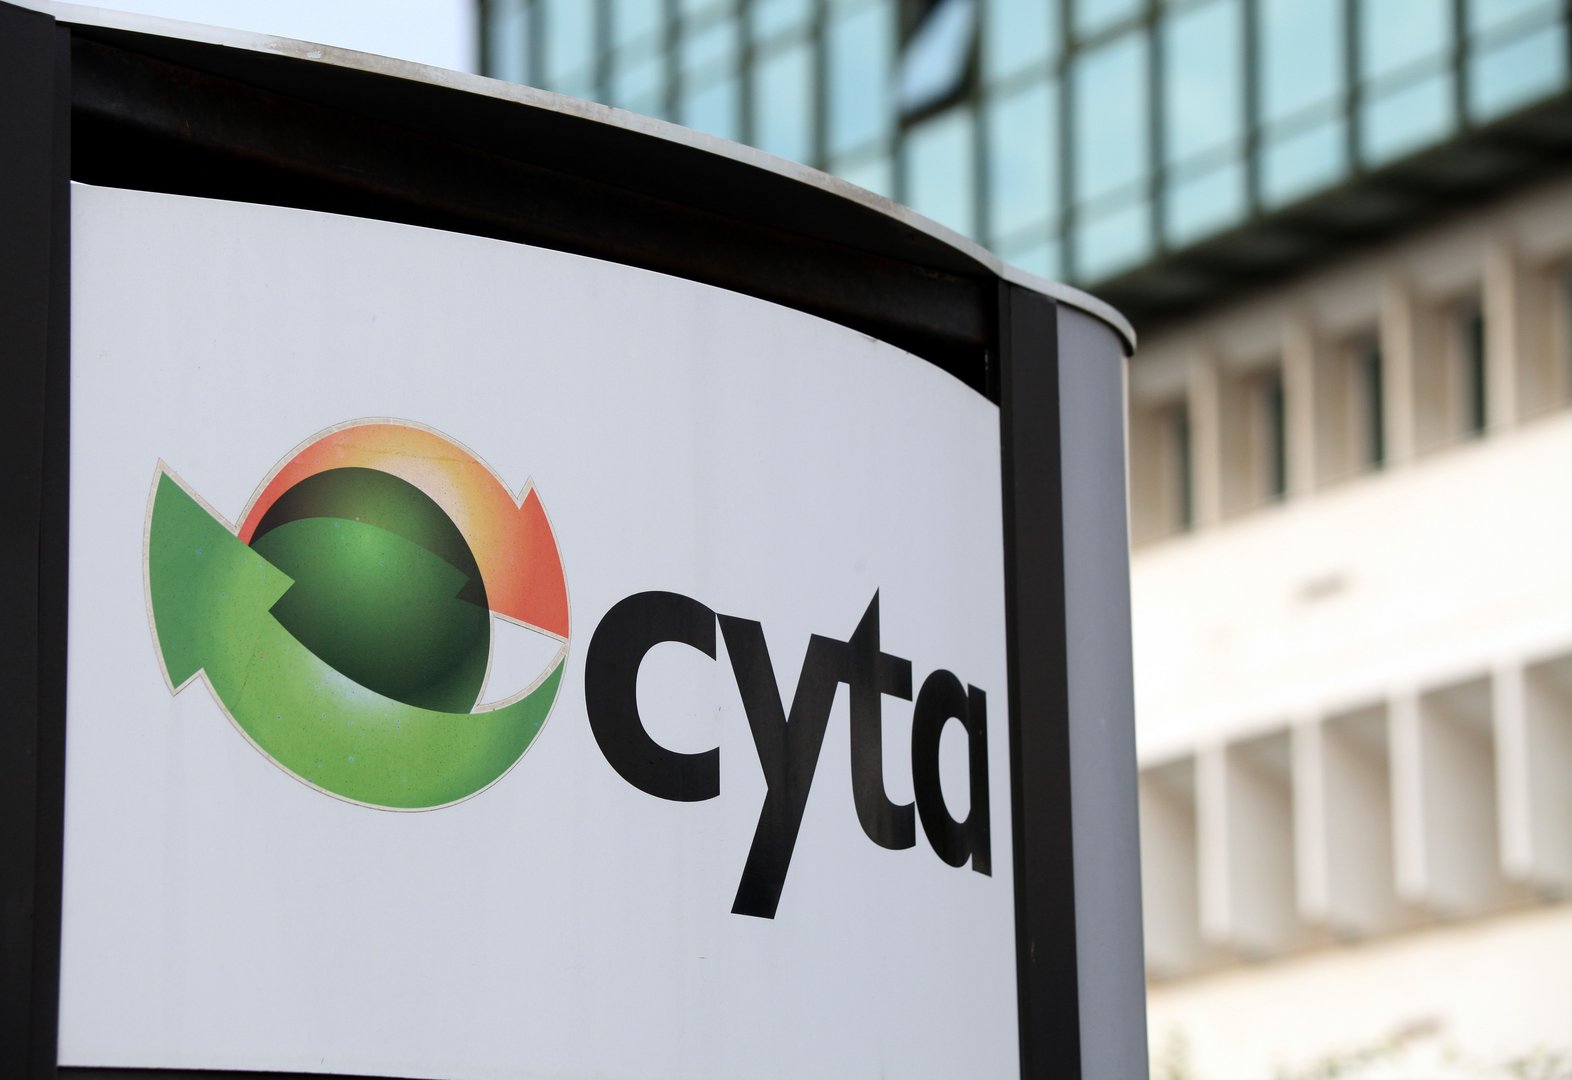 cover Our View: State-backed Cyta could threaten free market competition